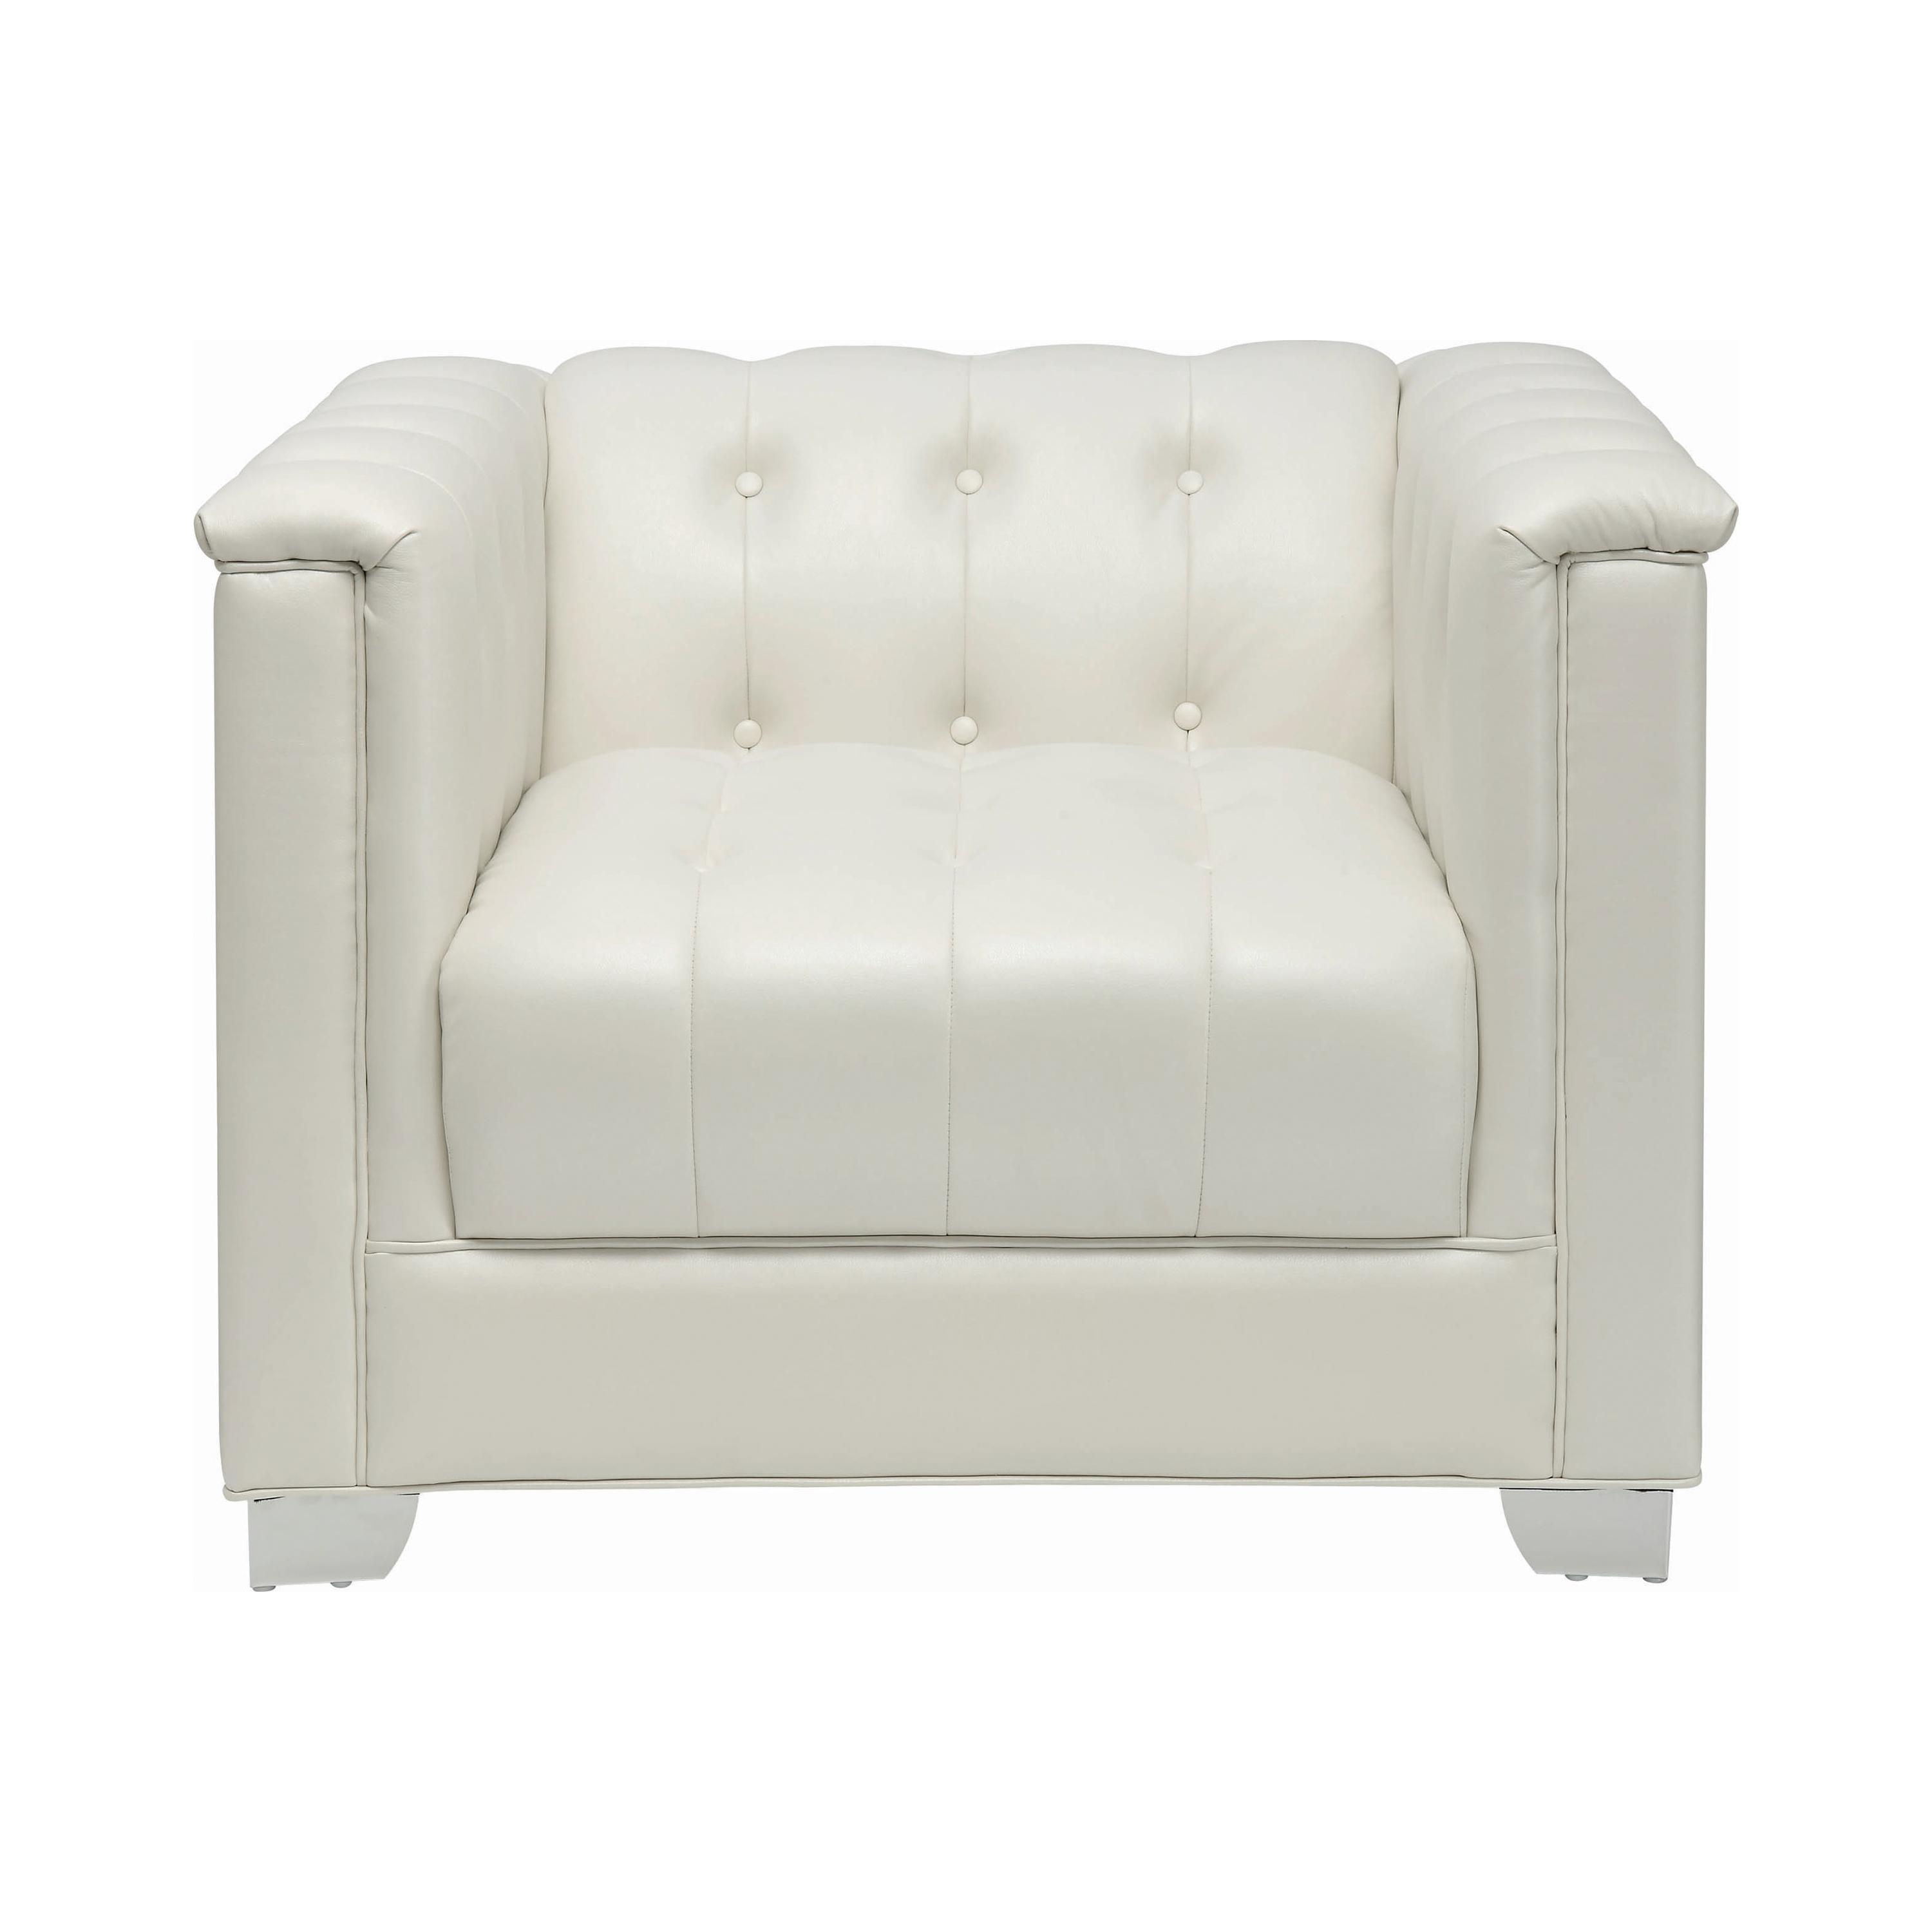 Contemporary Arm Chair 505393 Chaviano 505393 in Pearl White Leatherette